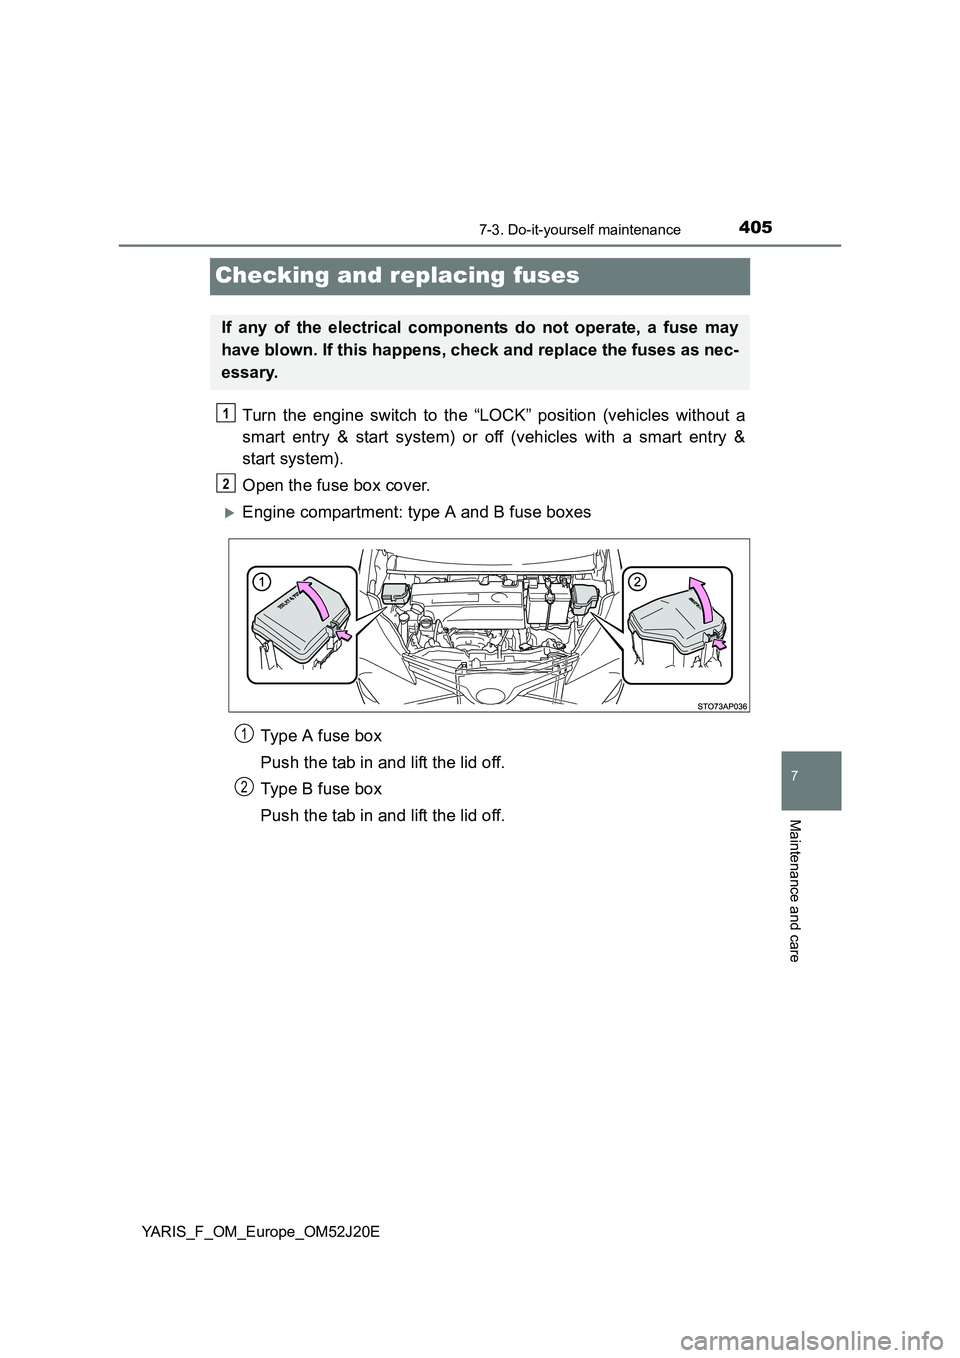 TOYOTA YARIS 2017  Owners Manual 4057-3. Do-it-yourself maintenance
7
Maintenance and care
YARIS_F_OM_Europe_OM52J20E
Checking and replacing fuses
Turn the engine switch to the “LOCK” position (vehicles without a 
smart entry & s